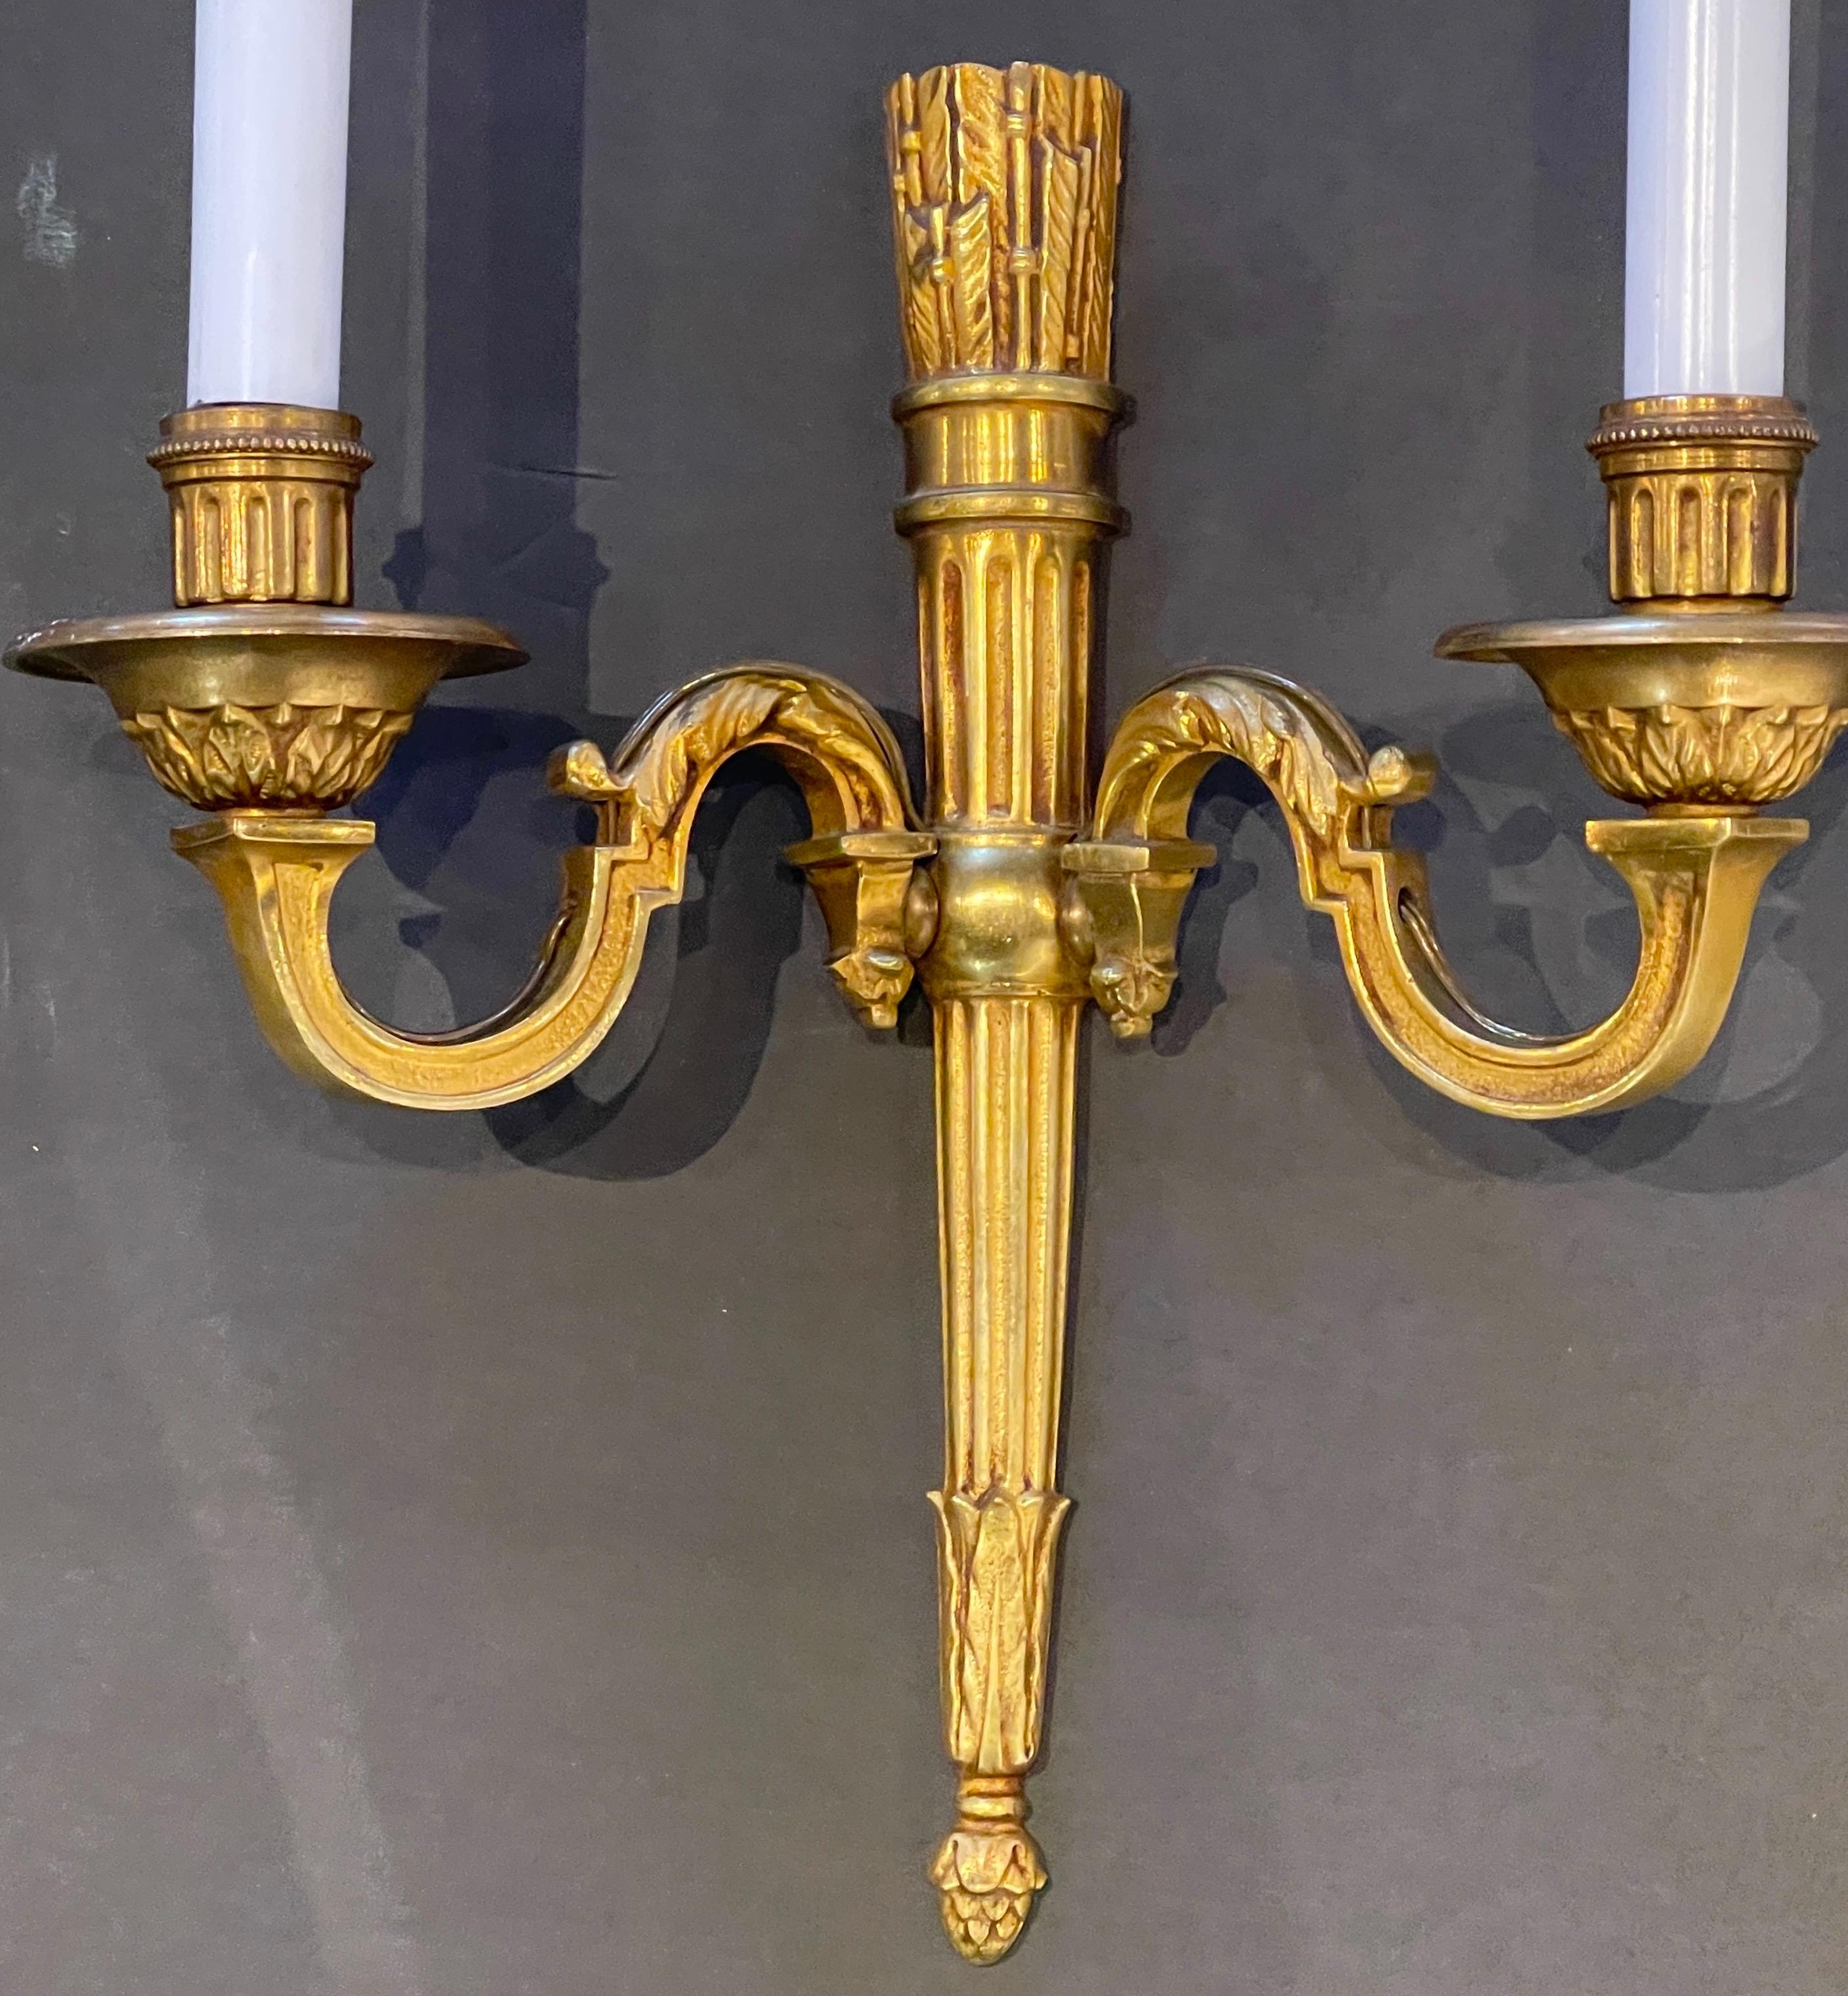 Cast Pair of Late 19th Century French Ormolu Neoclassical, Regence Stye Sconces  For Sale